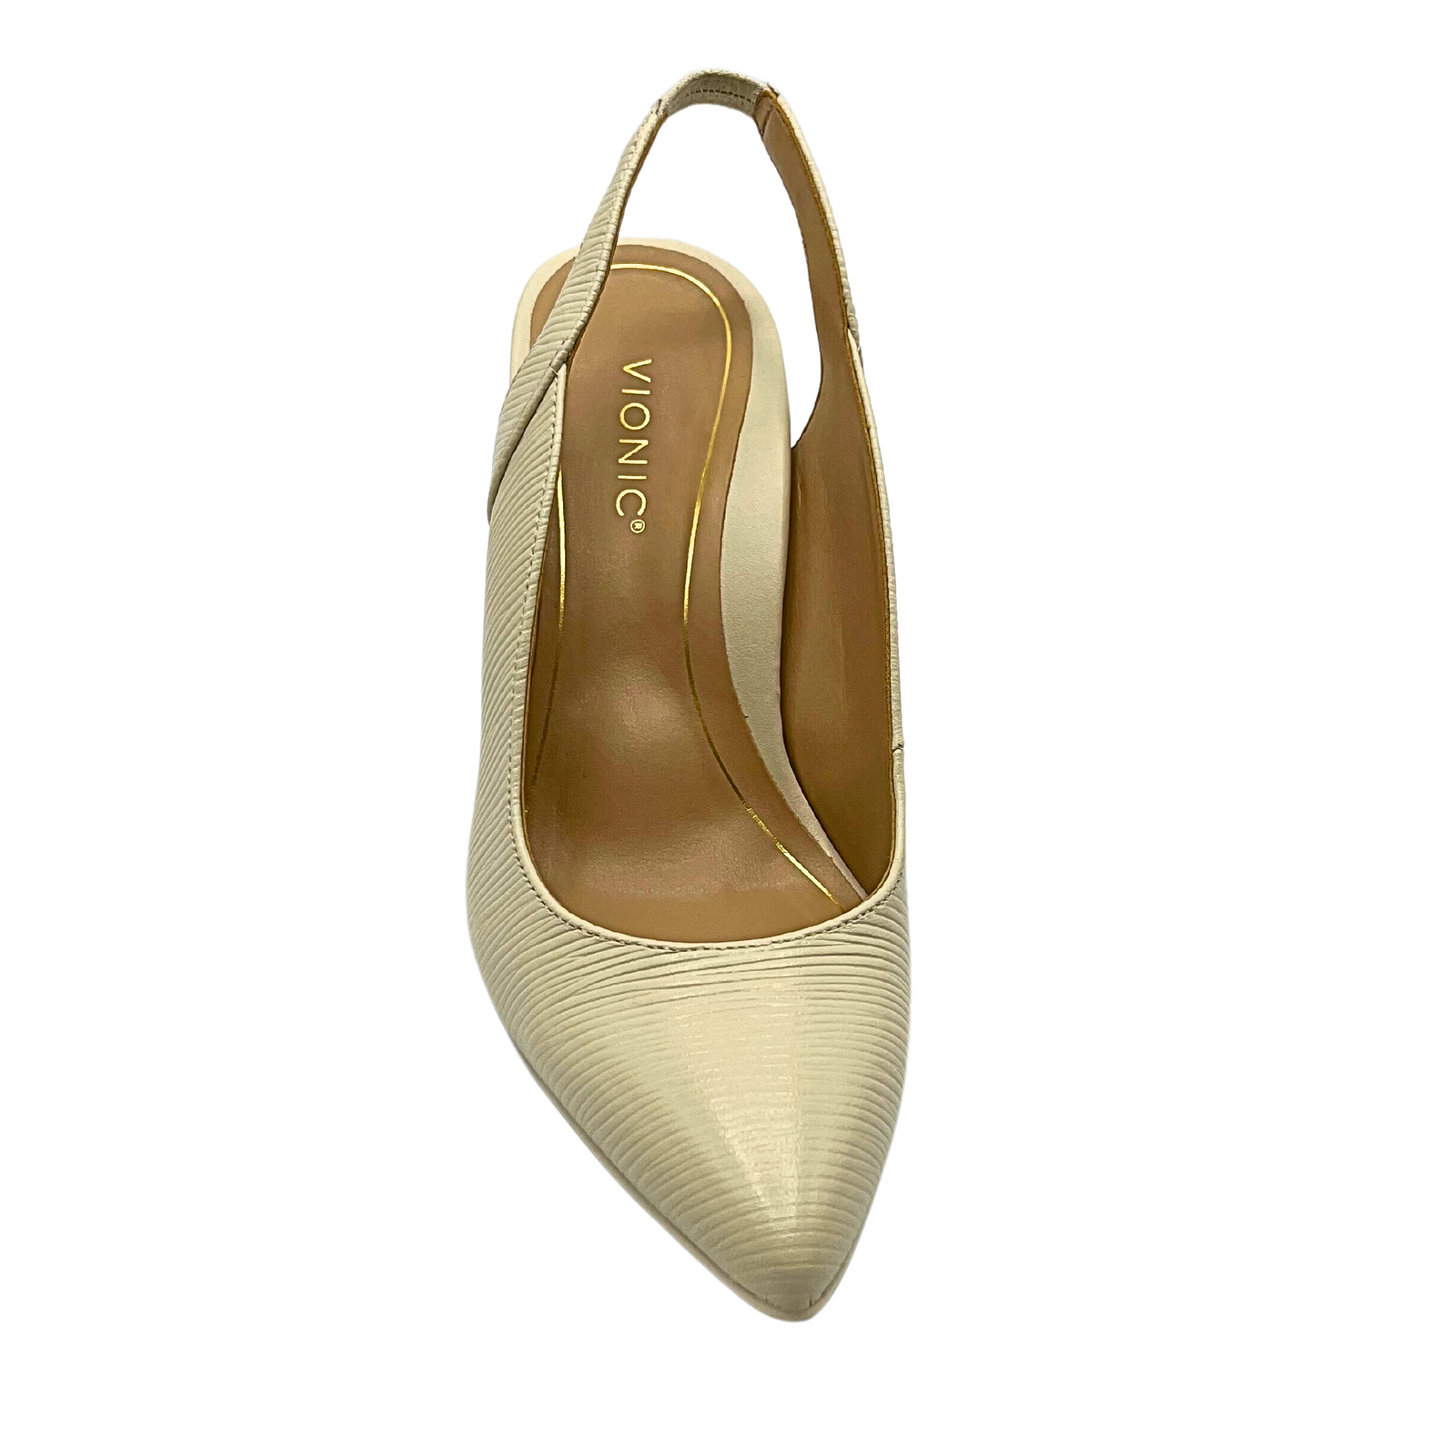 Top down view of a cream colored leather slingback sandal.  Slightly pointed toe 